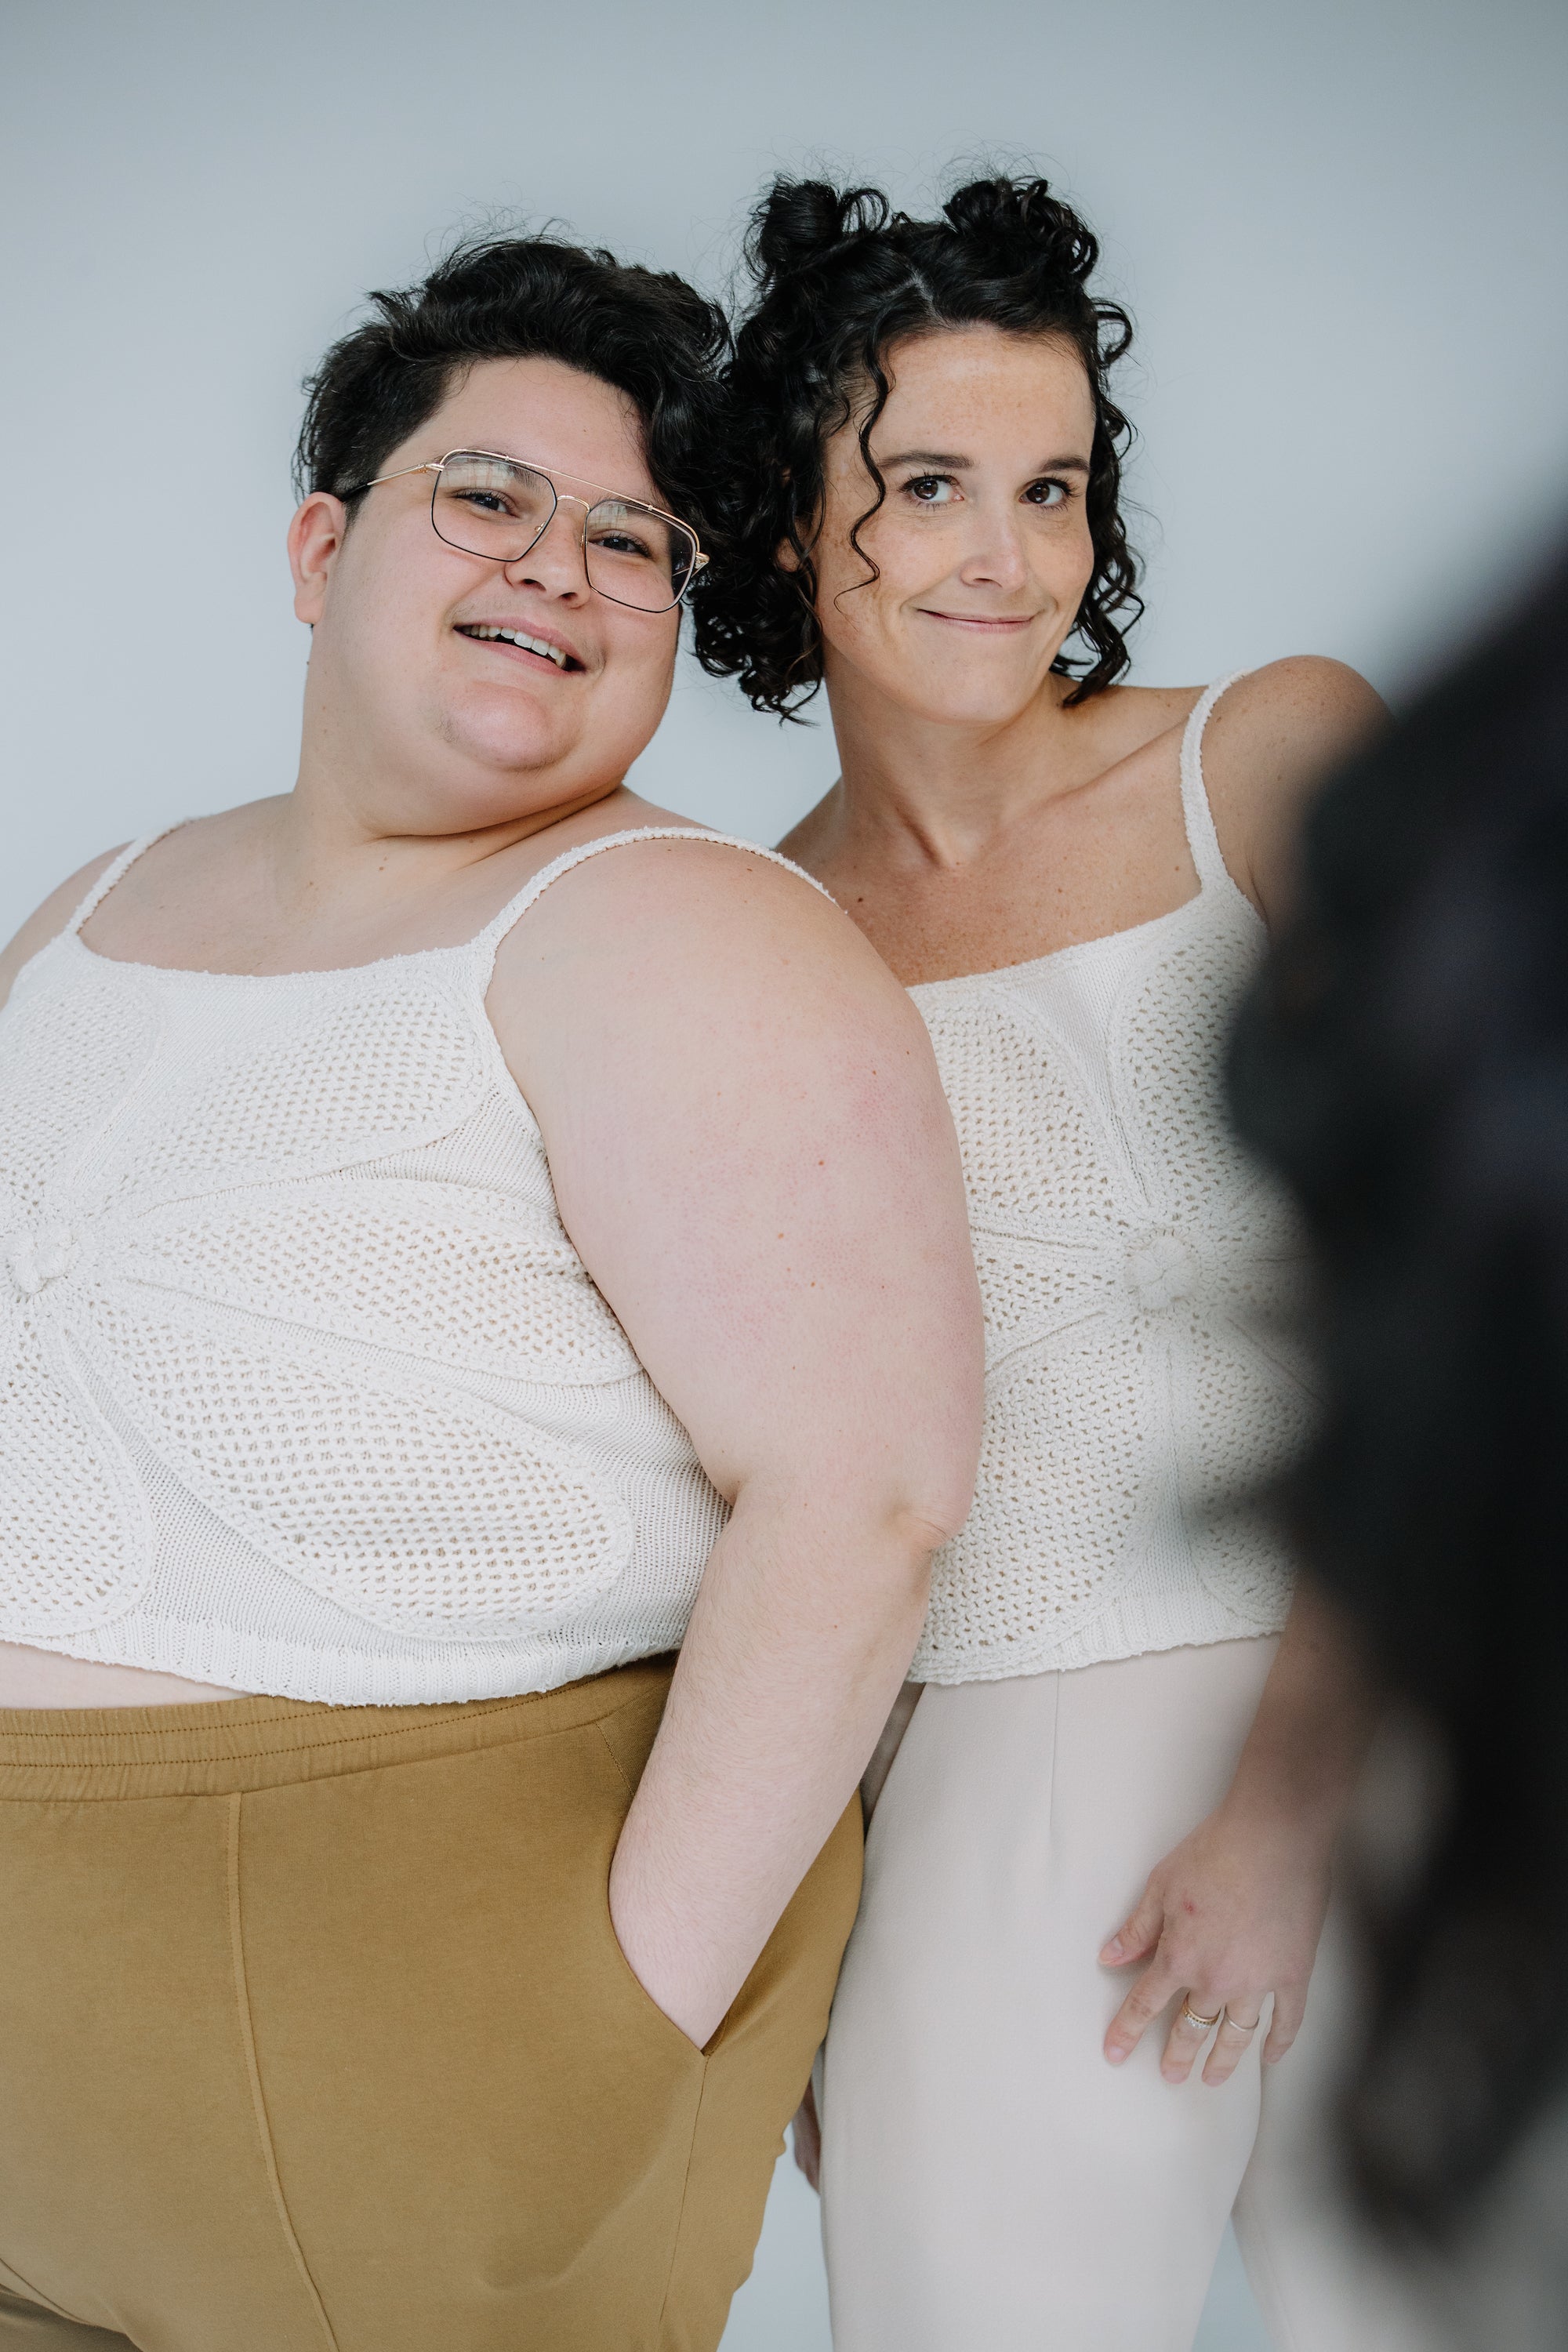 jules and lacey model the lingua franca crochet flower tank in ivory. jules is wearing theirs with mustard day lantern pants, and lacey has on kaarem sua trousers. they are both wearing sandals and soft smiling.